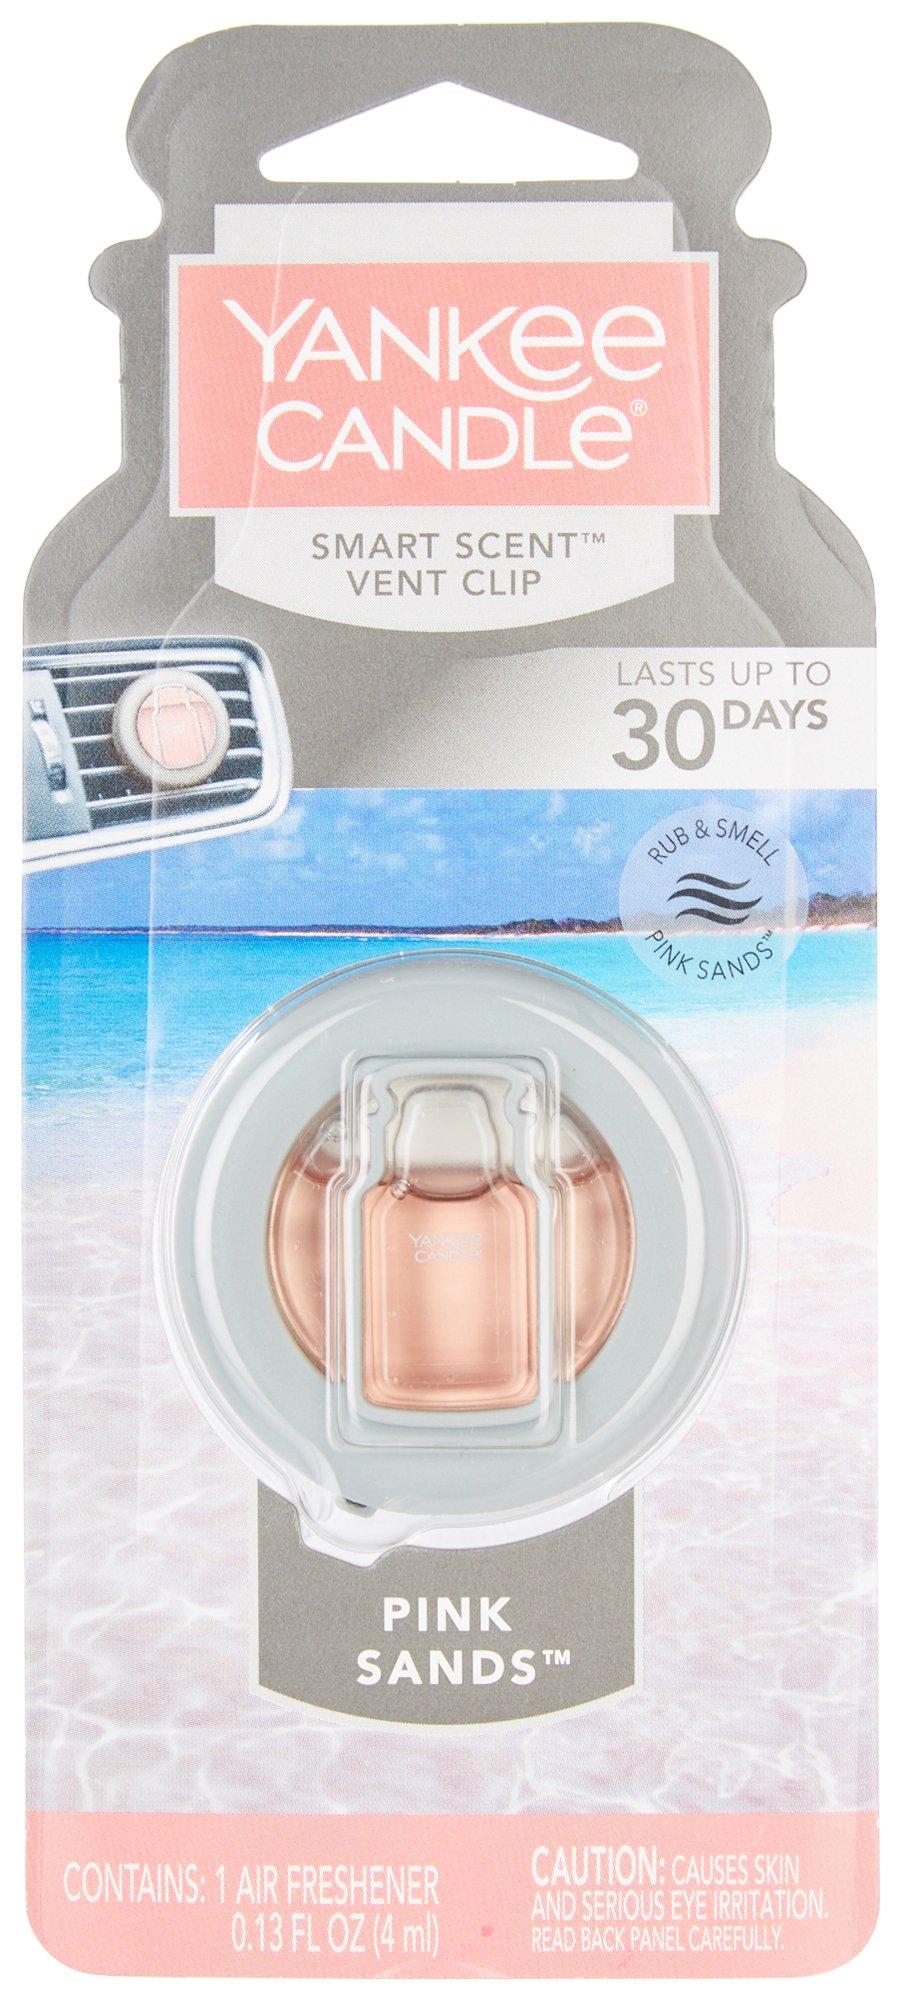 Yankee Candle Ice Berry Lemonade Smart Scent Vent Clip